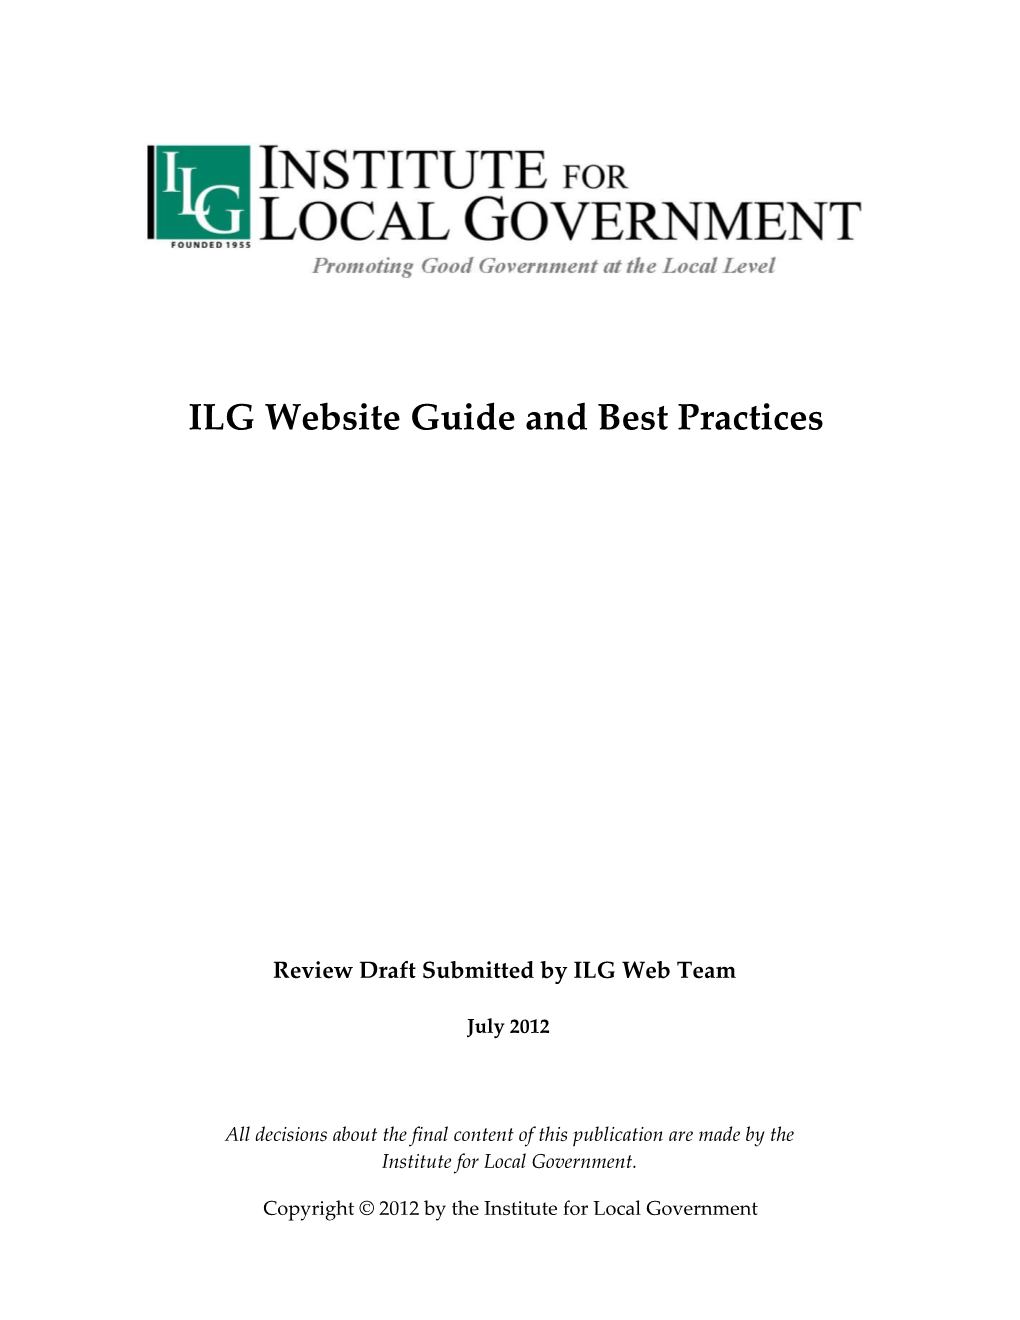 ILG Website Guide and Best Practices